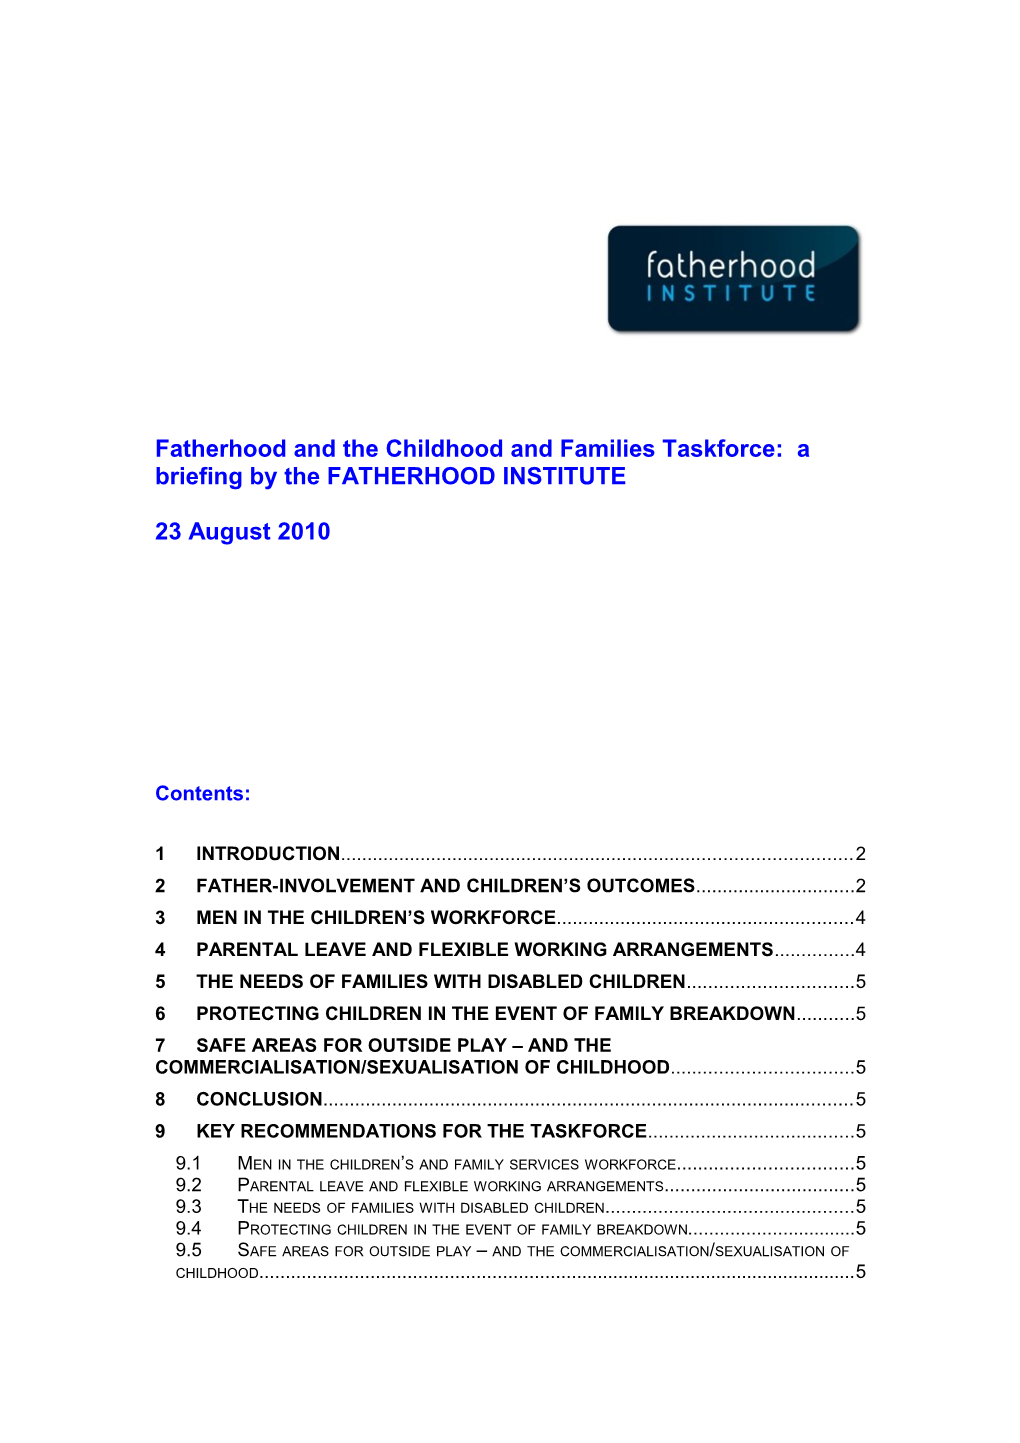 Fatherhood and the Children and Families Taskforce